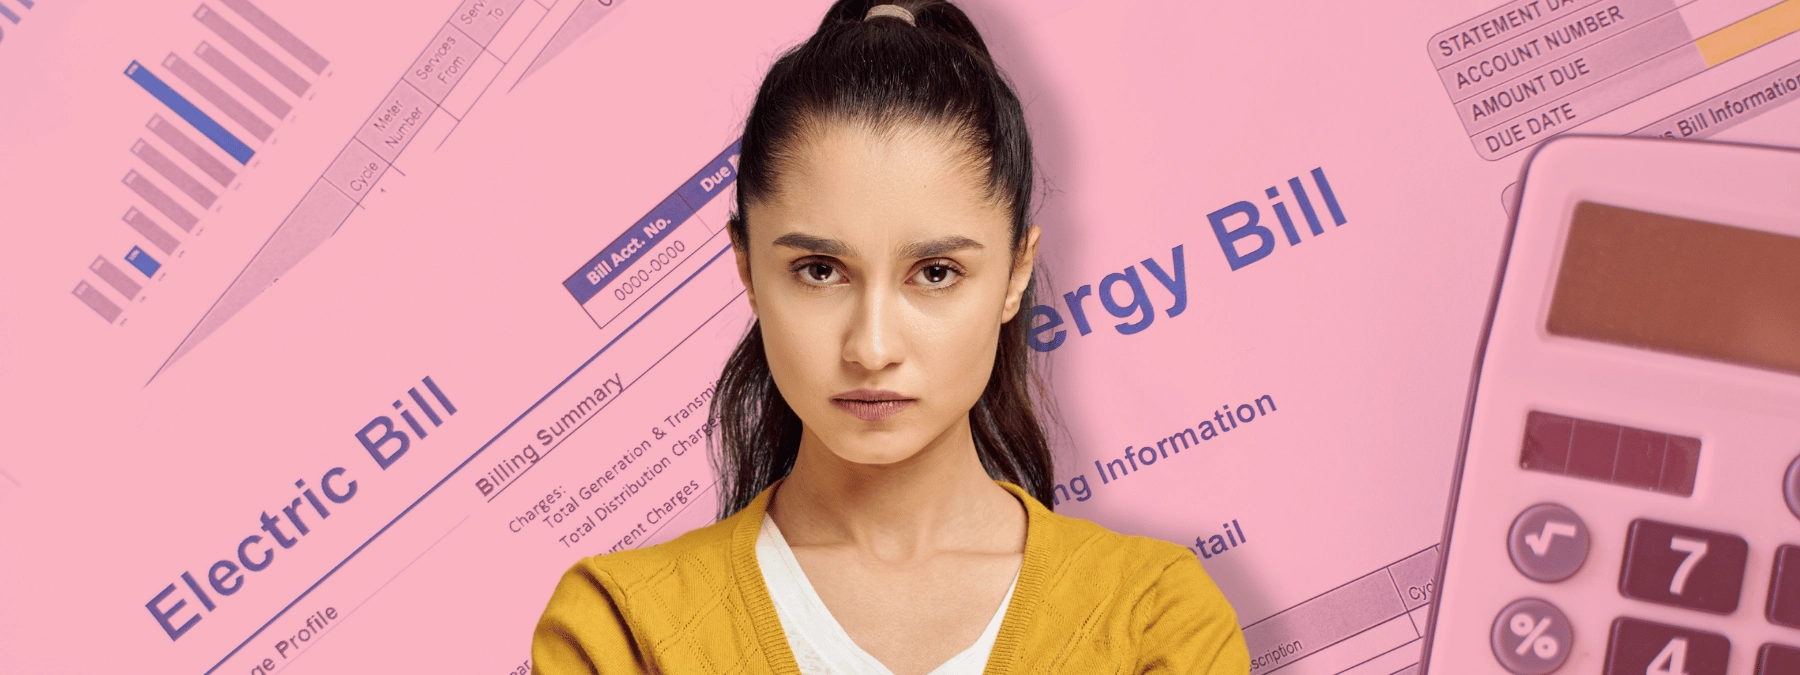 Woman in front of background of energy bills and a calculator